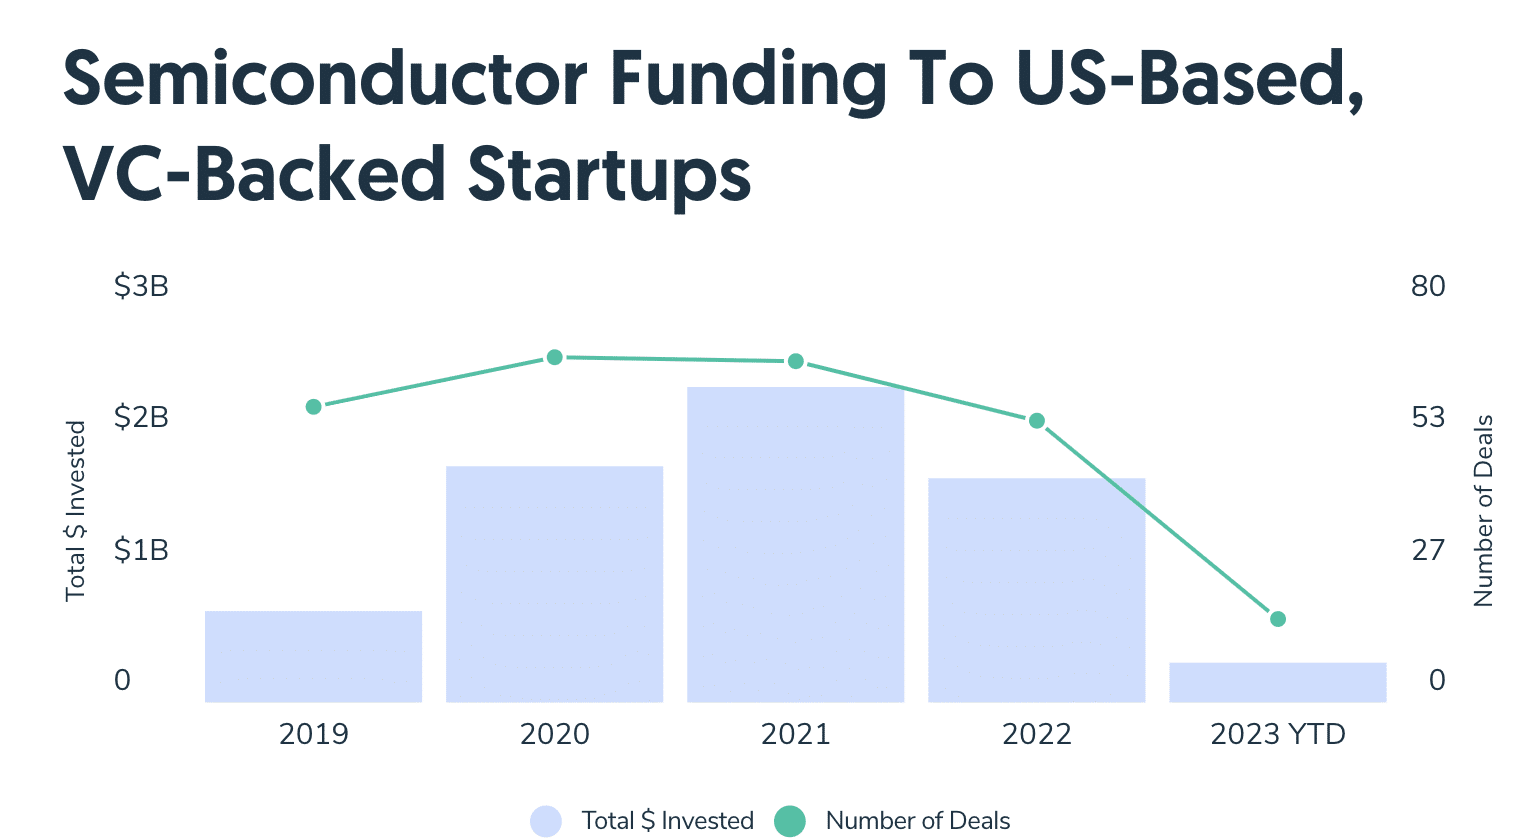 Funding to US semiconductor startups